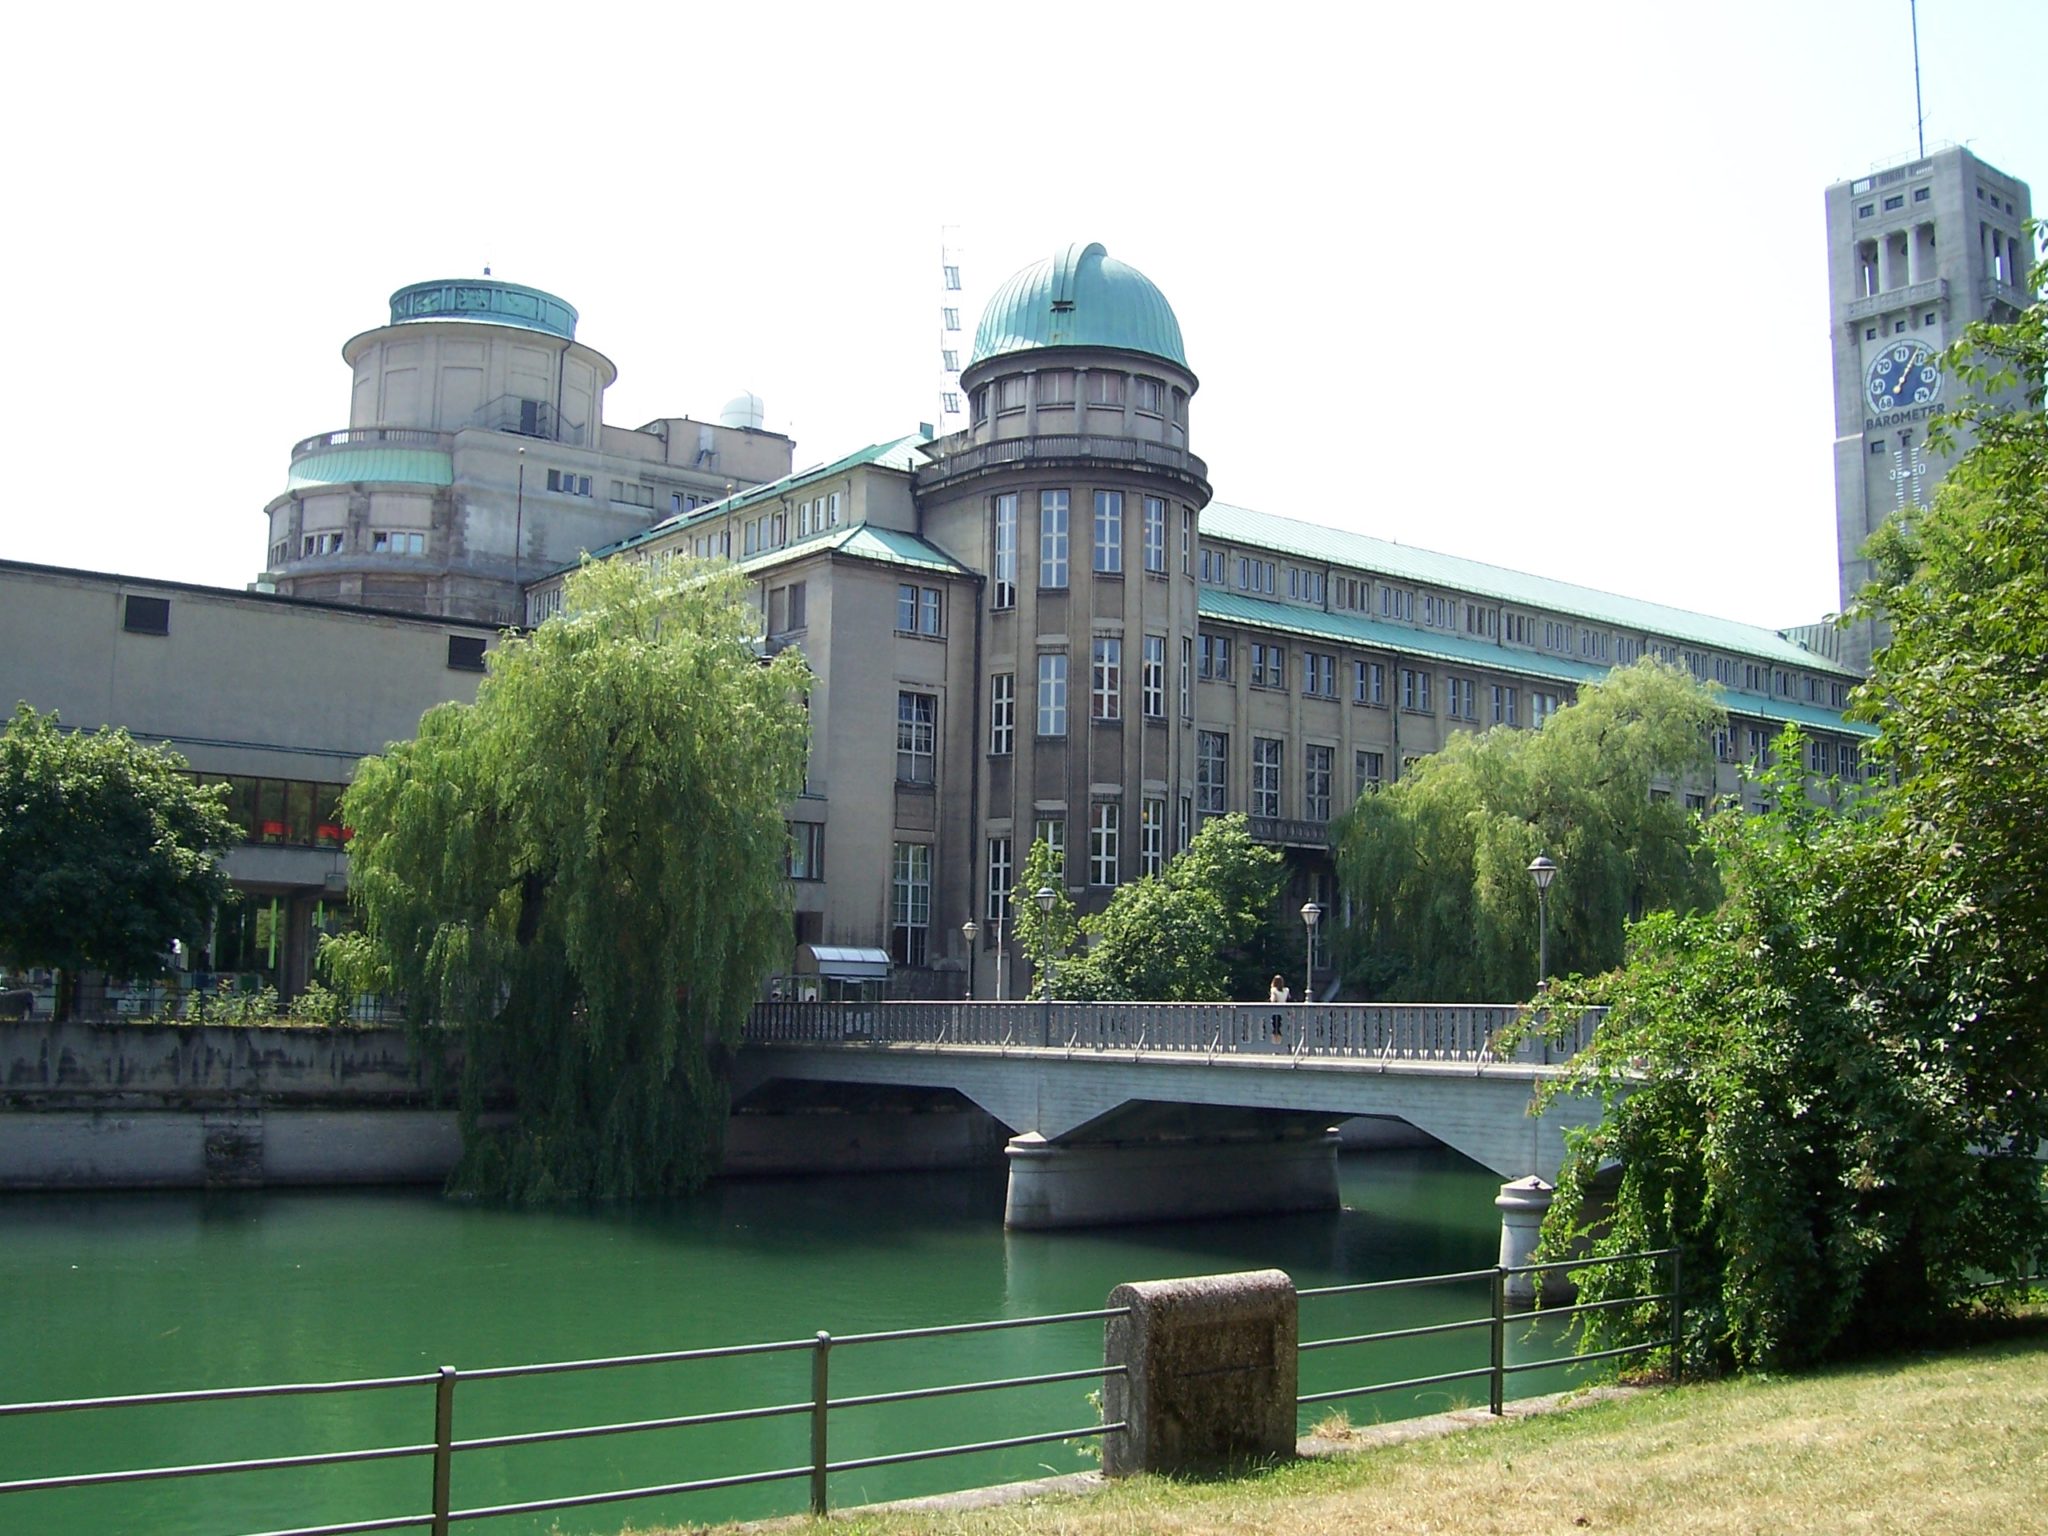 Deutsches Museum - Top 10 Things to See and Do in Munich, Germany